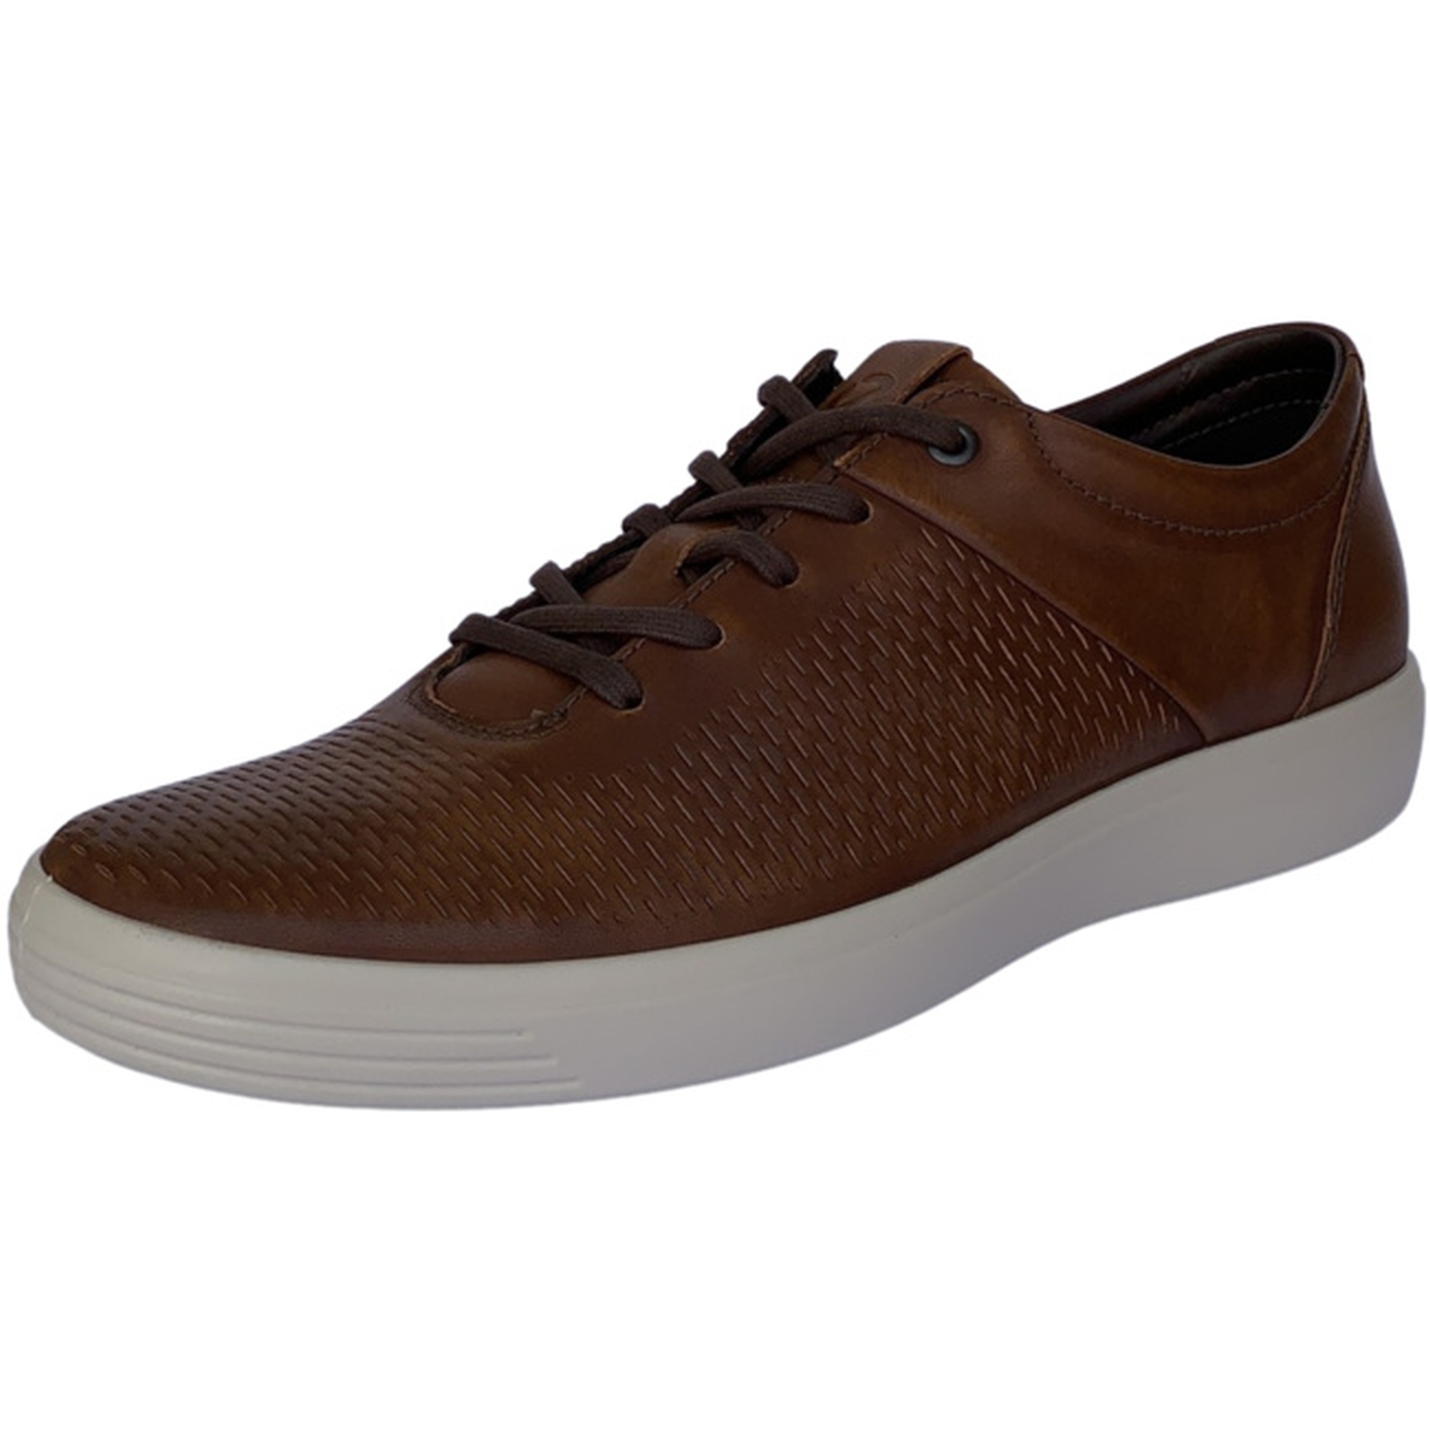 Ecco Soft 7 - Light brown smooth leather